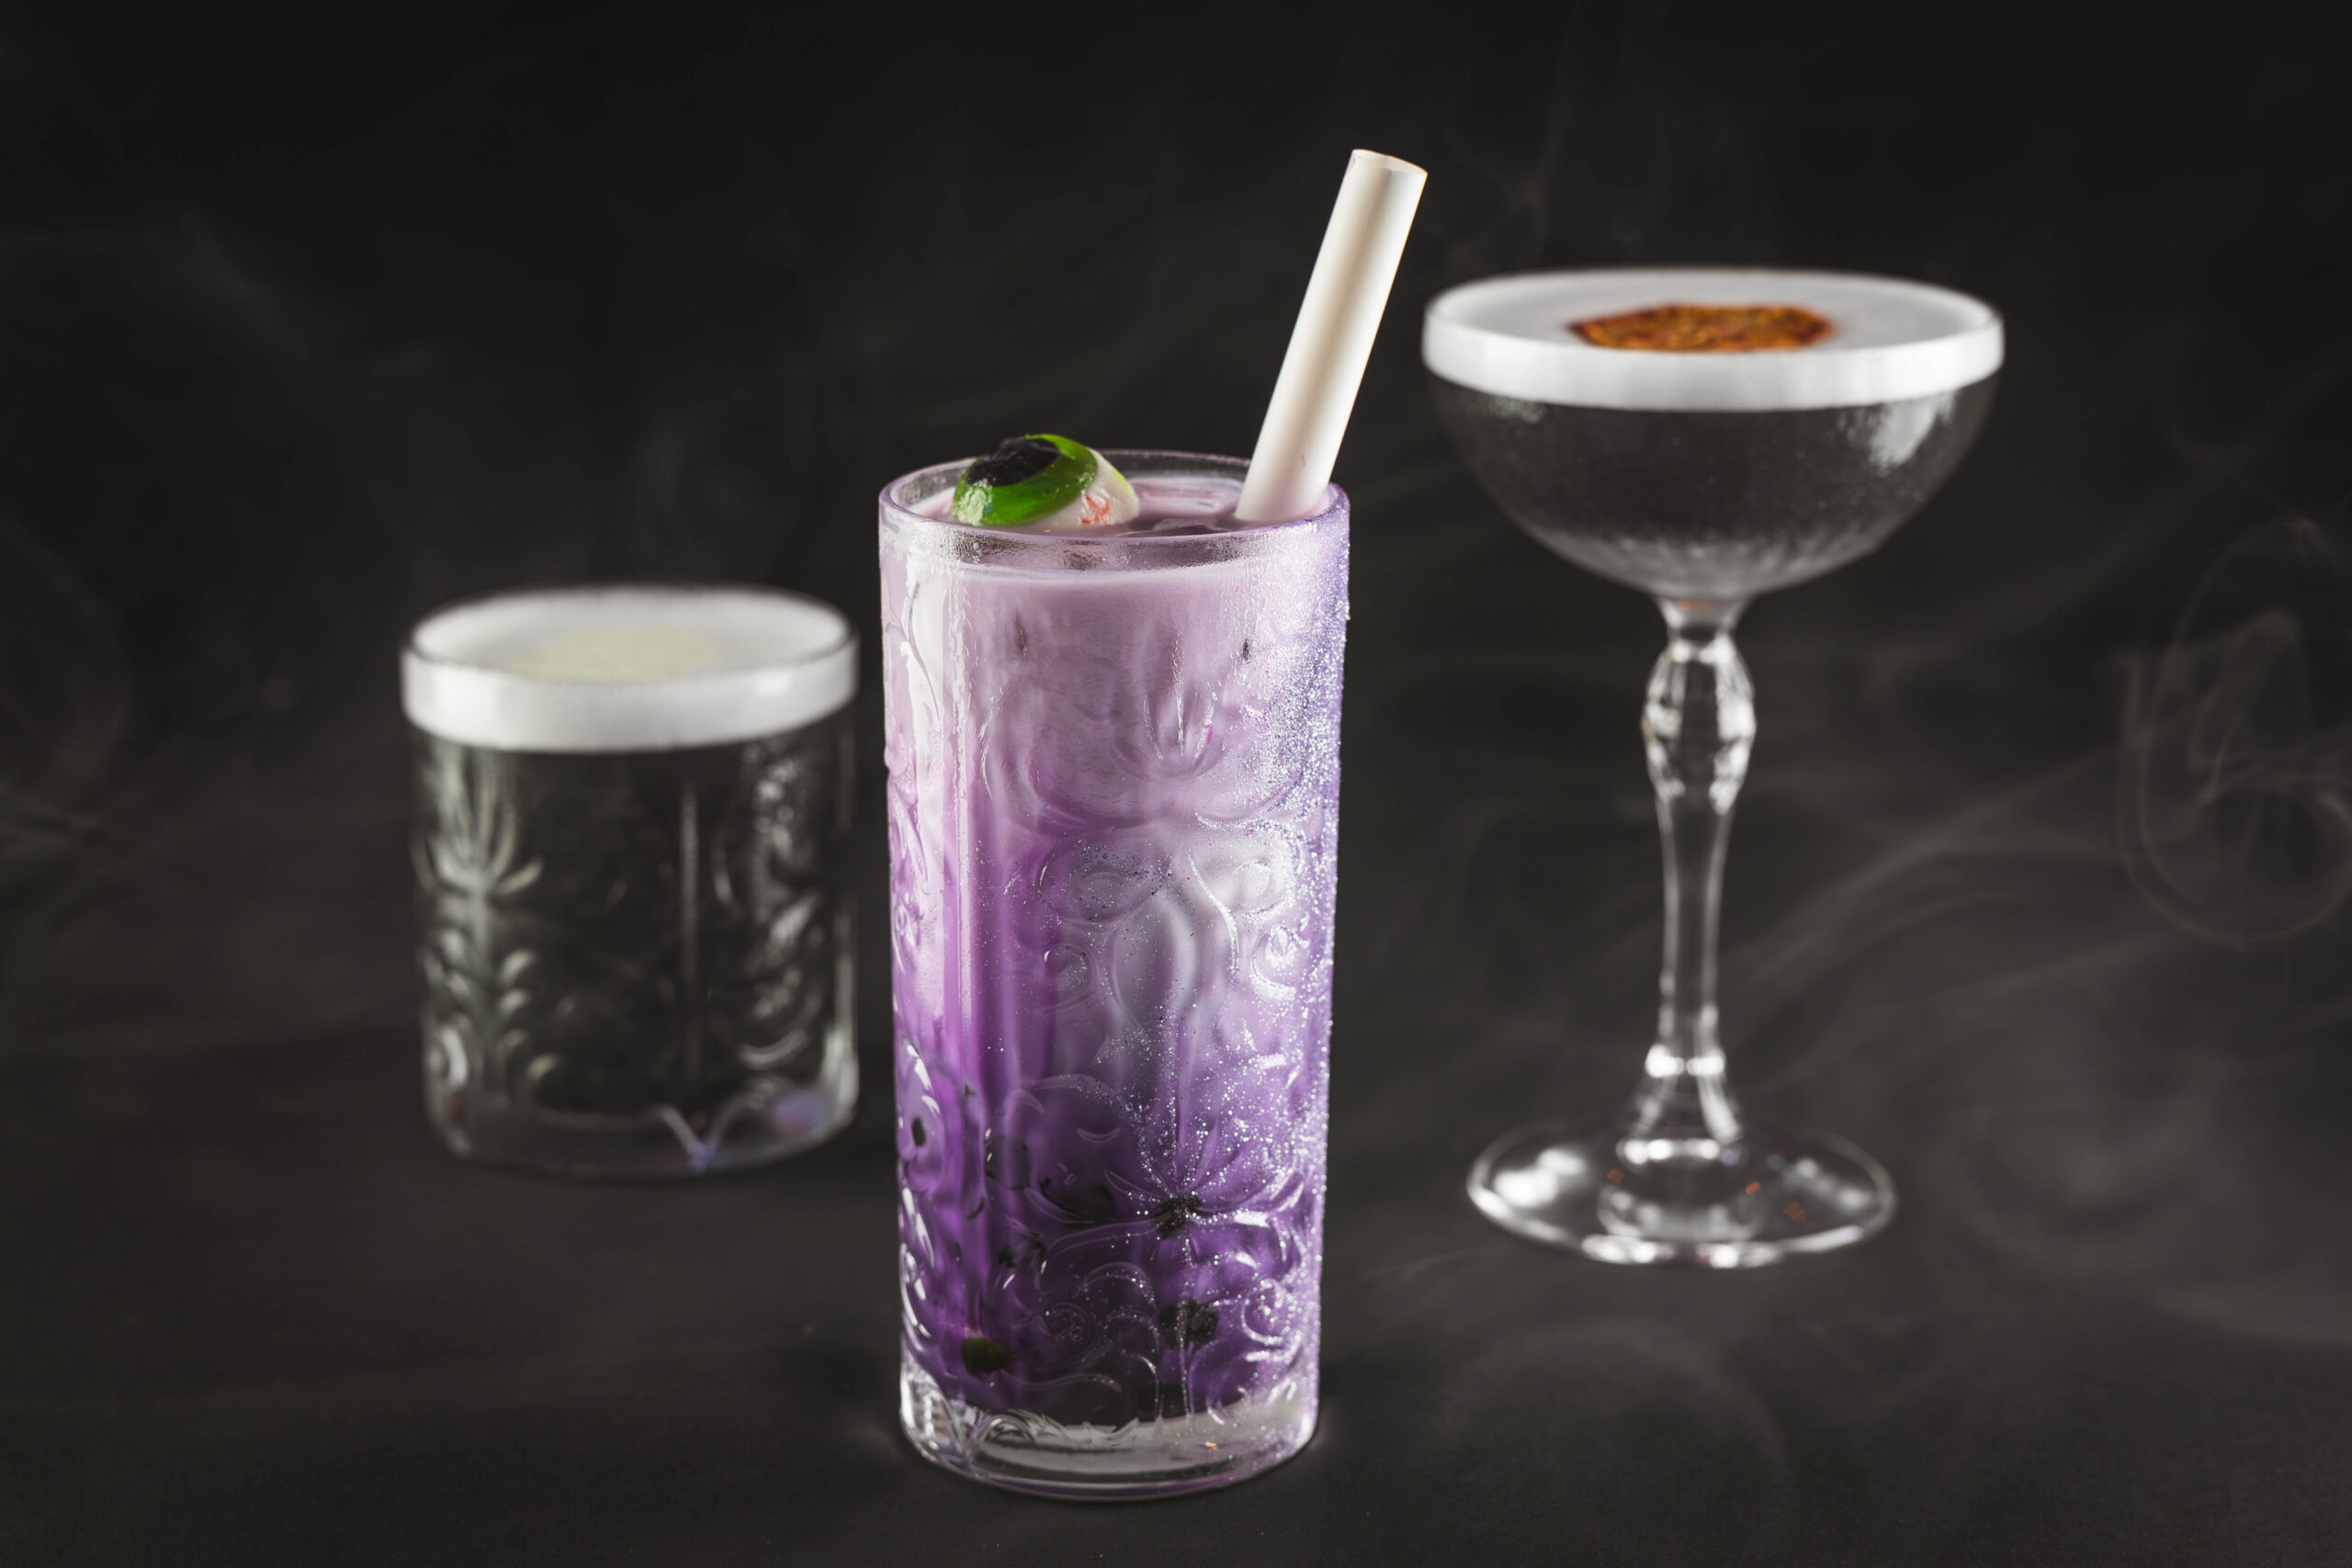 Disney Cruise Line reveals the Haunted Mansion Parlor, an all-new bar inspired by the iconic Disney Parks attraction, The Haunted Mansion. Foolish mortals will sip spirited craft cocktails among happy haunts for the first time inside this new venue on board the Disney Treasure when it sets sail in December 2024. (Mariah Wild, Photographer) ©Disney